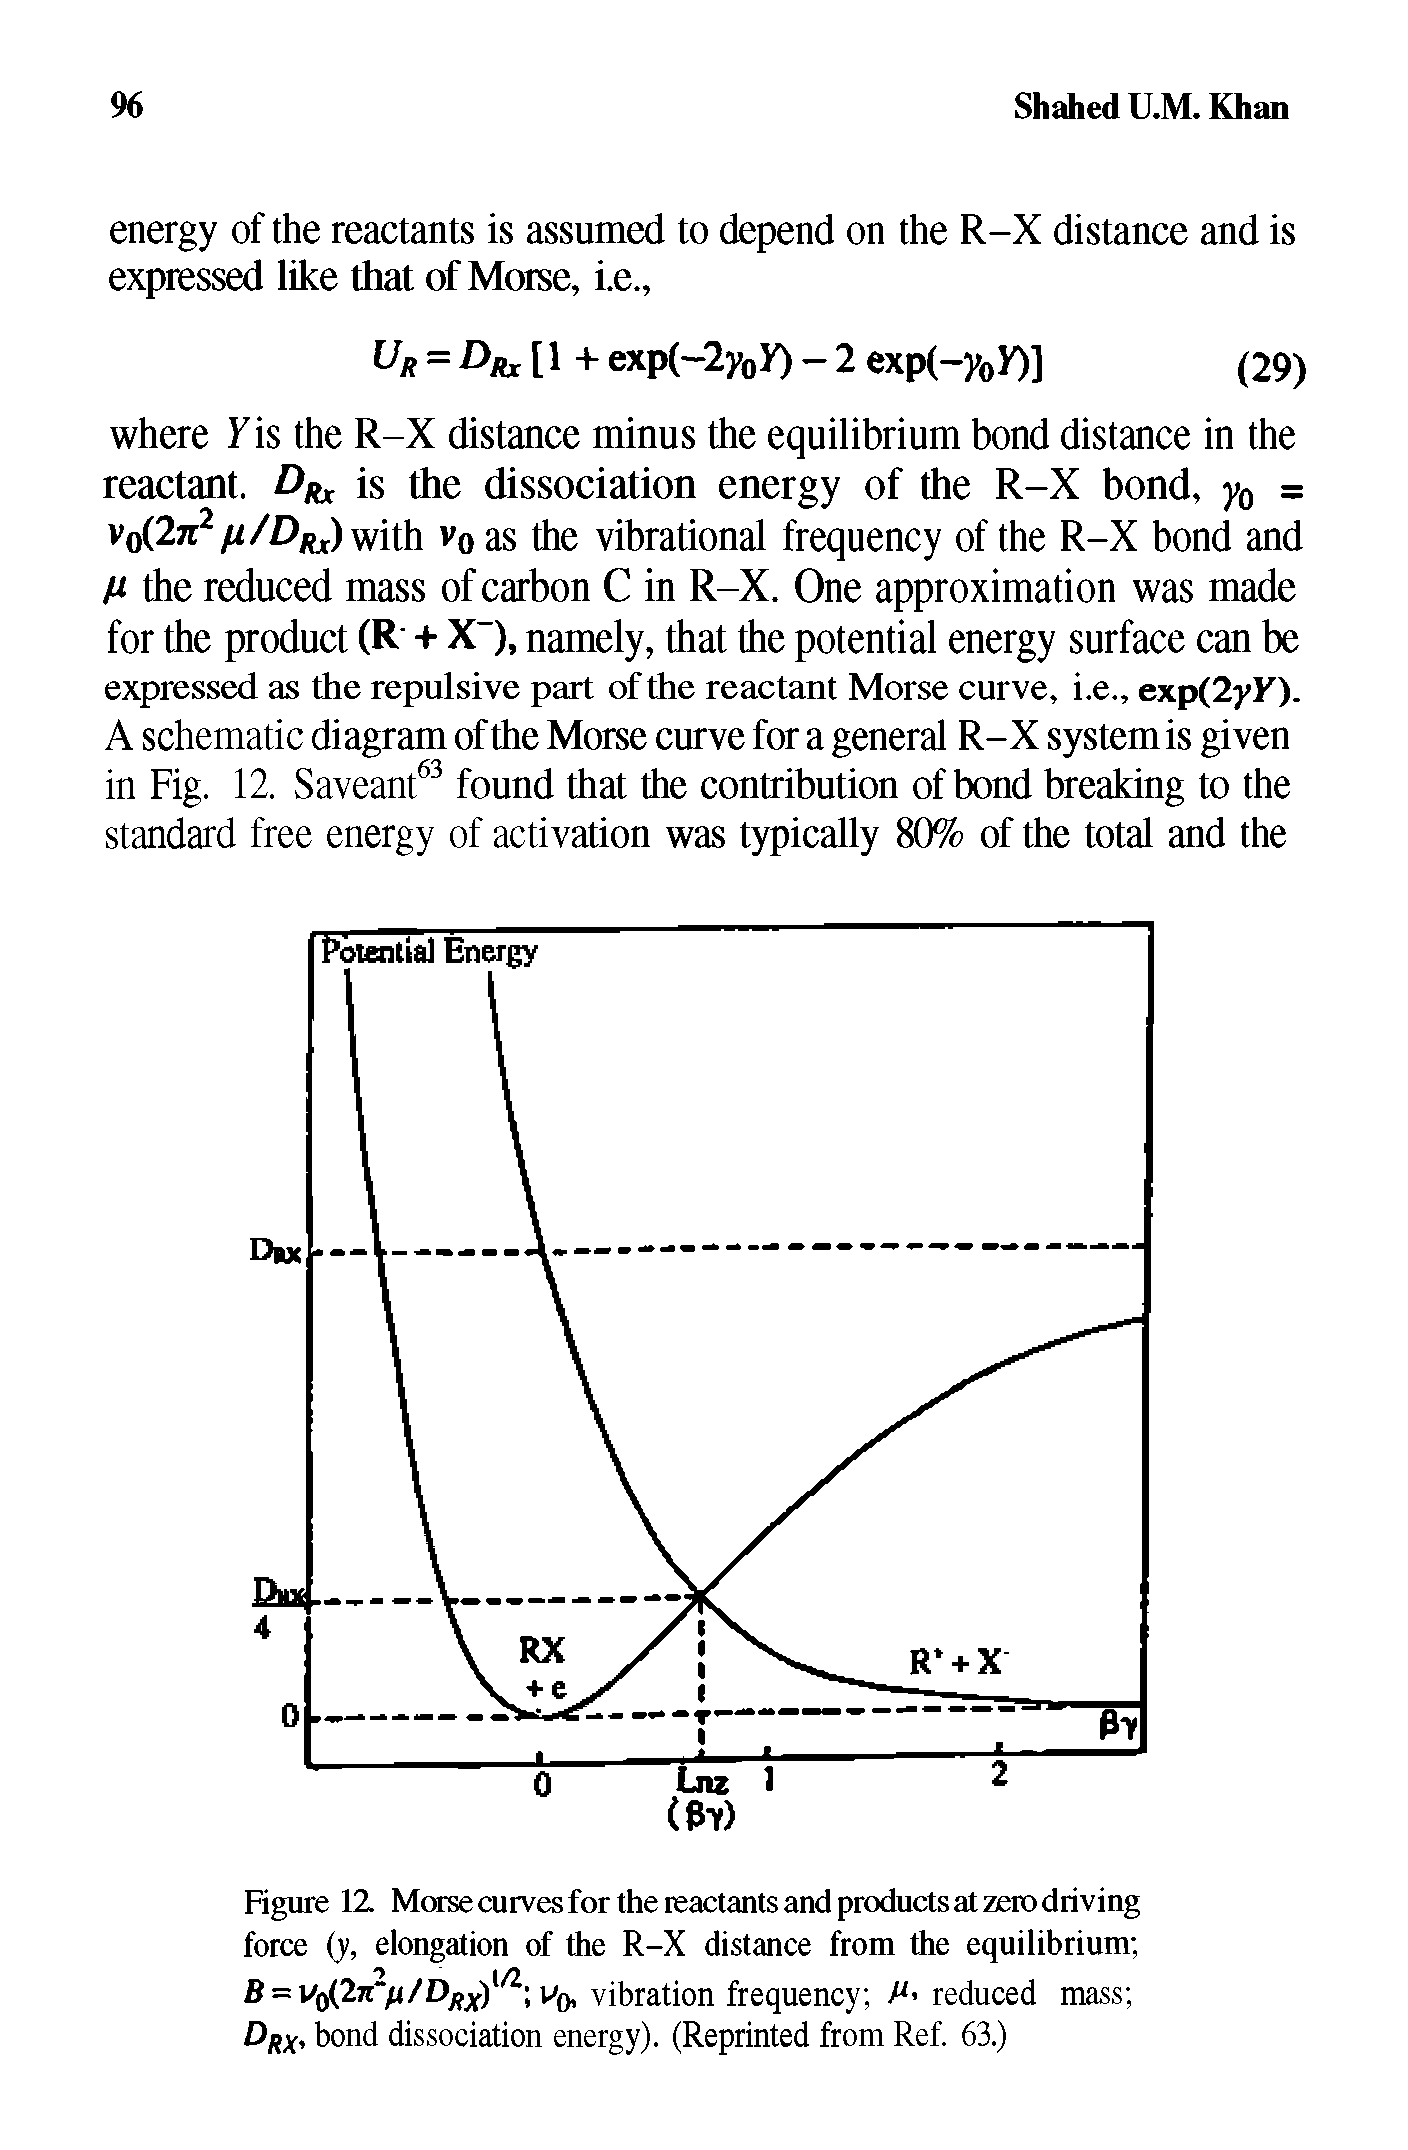 Figure 12 Morse curves for the reactants and products at zero driving force (y, elongation of the R-X distance from the equilibrium ...